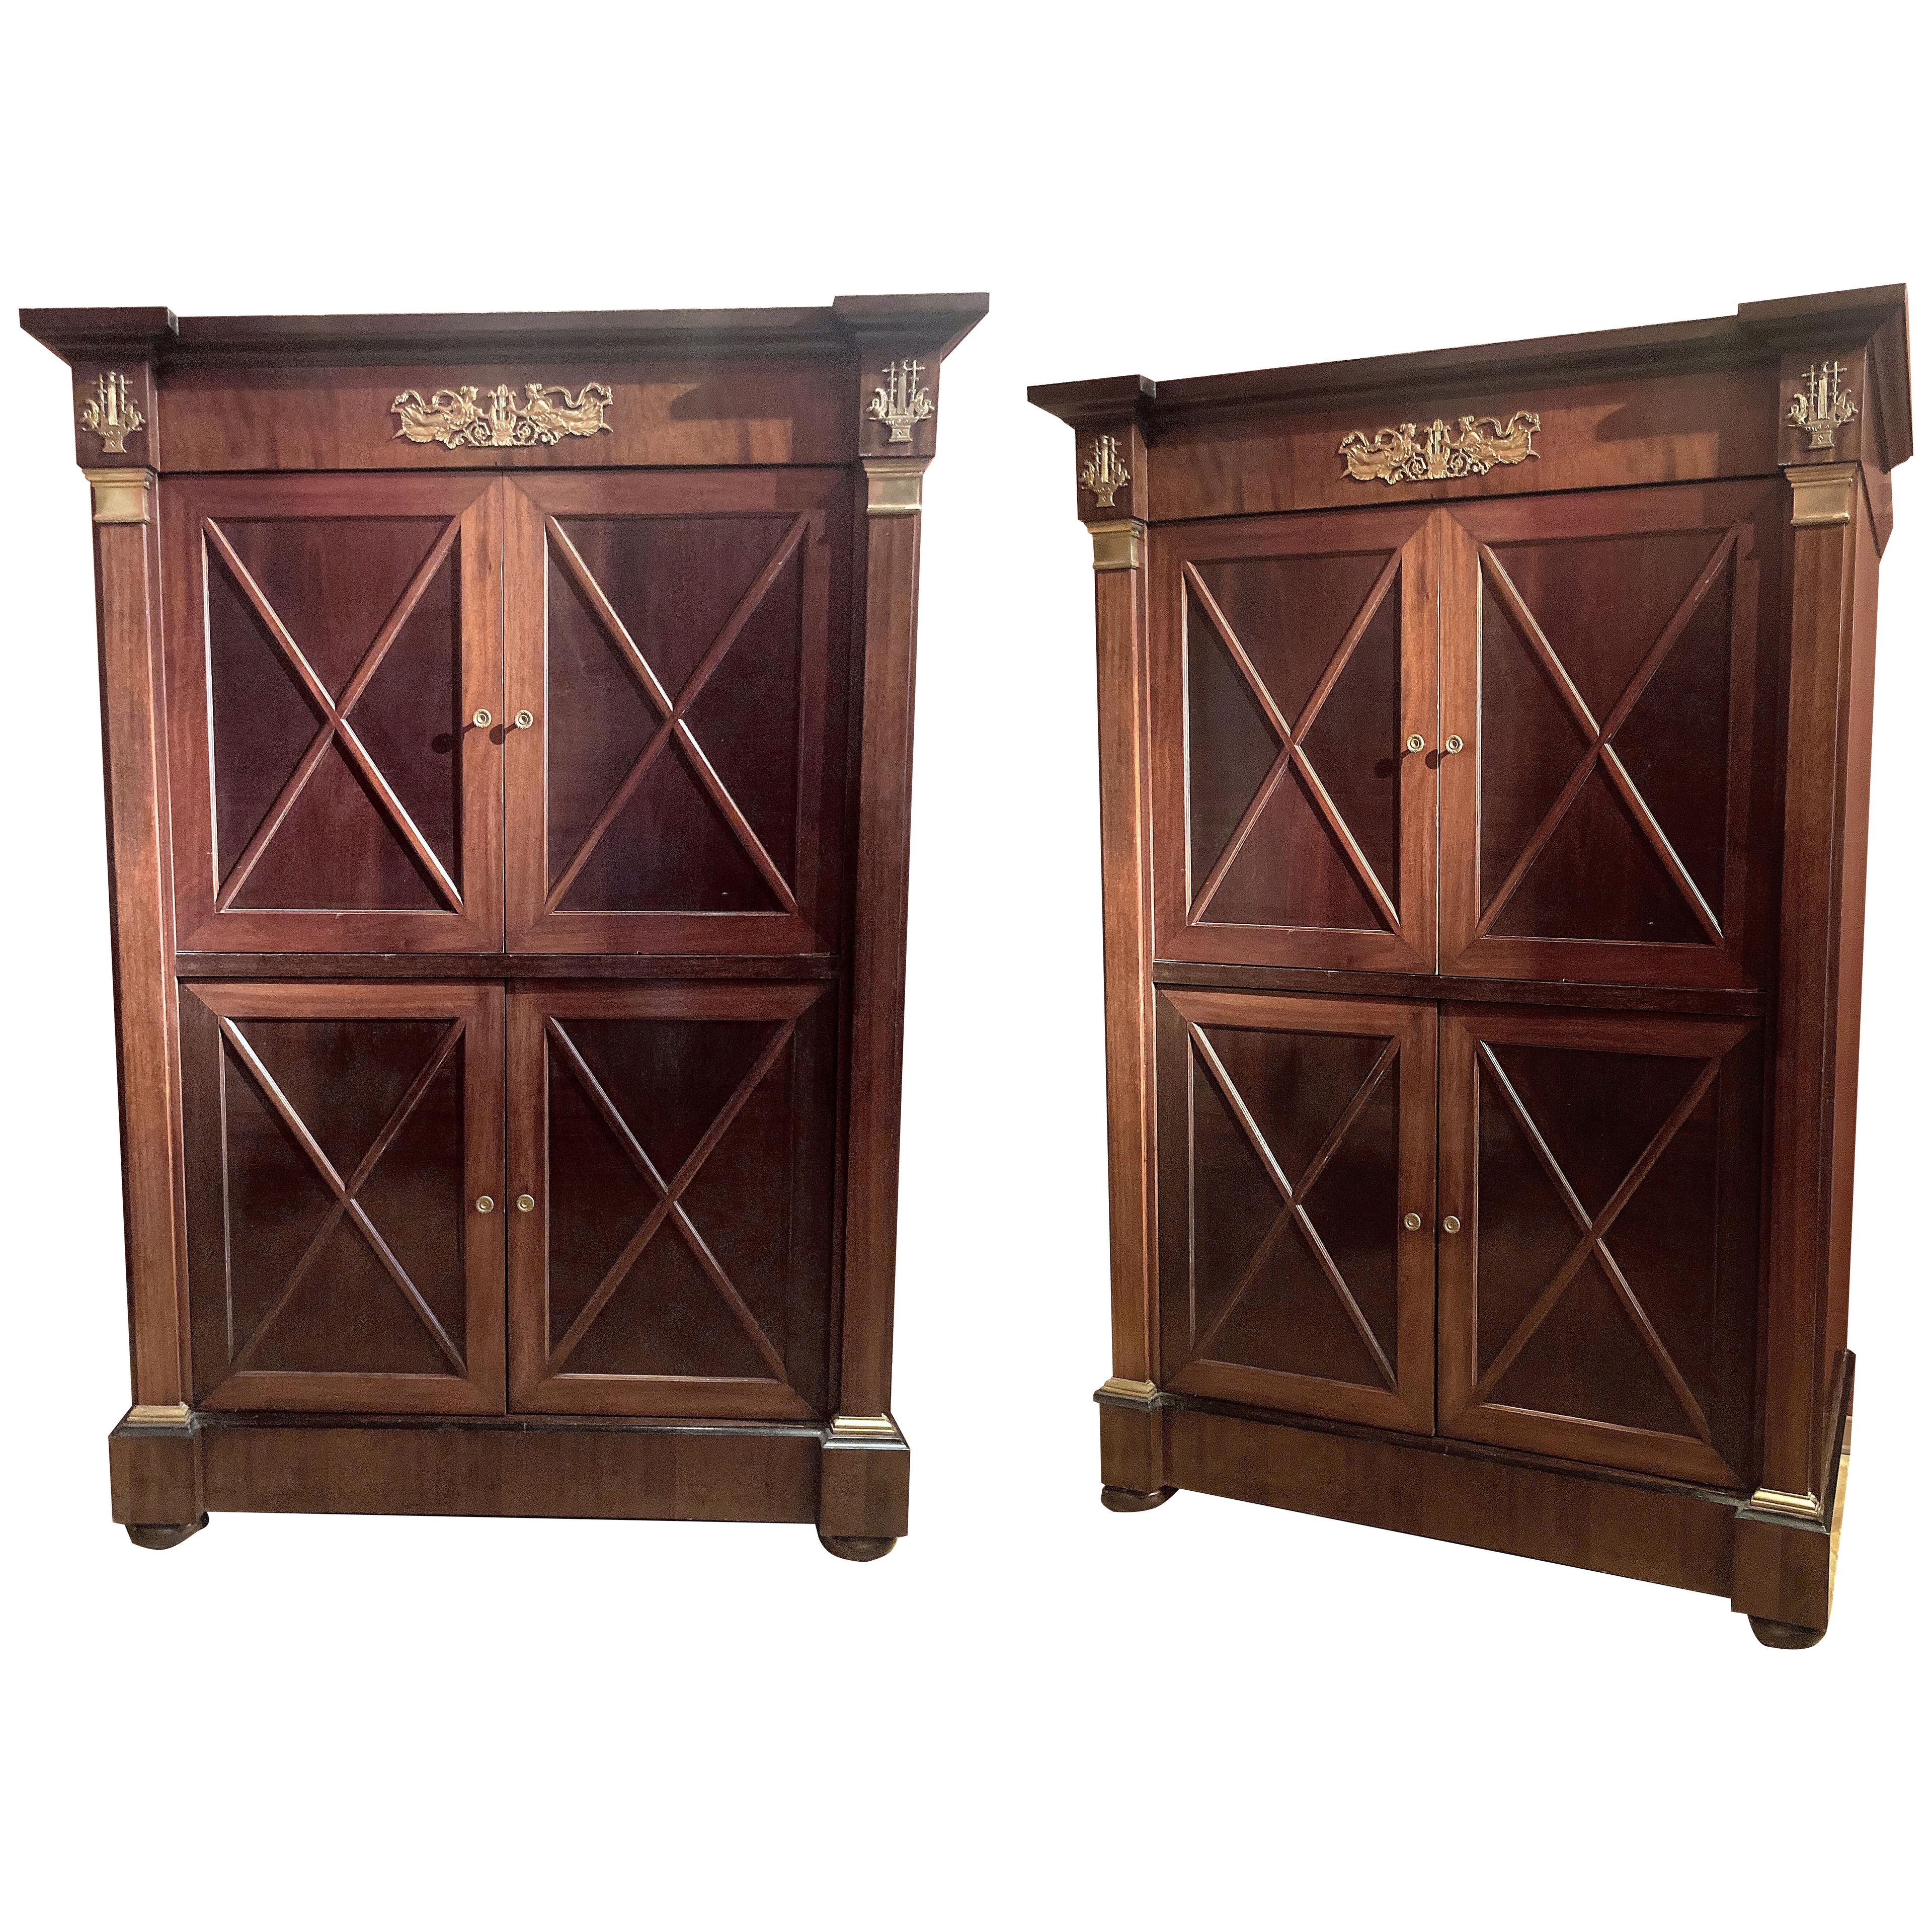 French Empire Style Mahogany and Ormolu Four Doors Cabinets, Armoire or Dry Bar